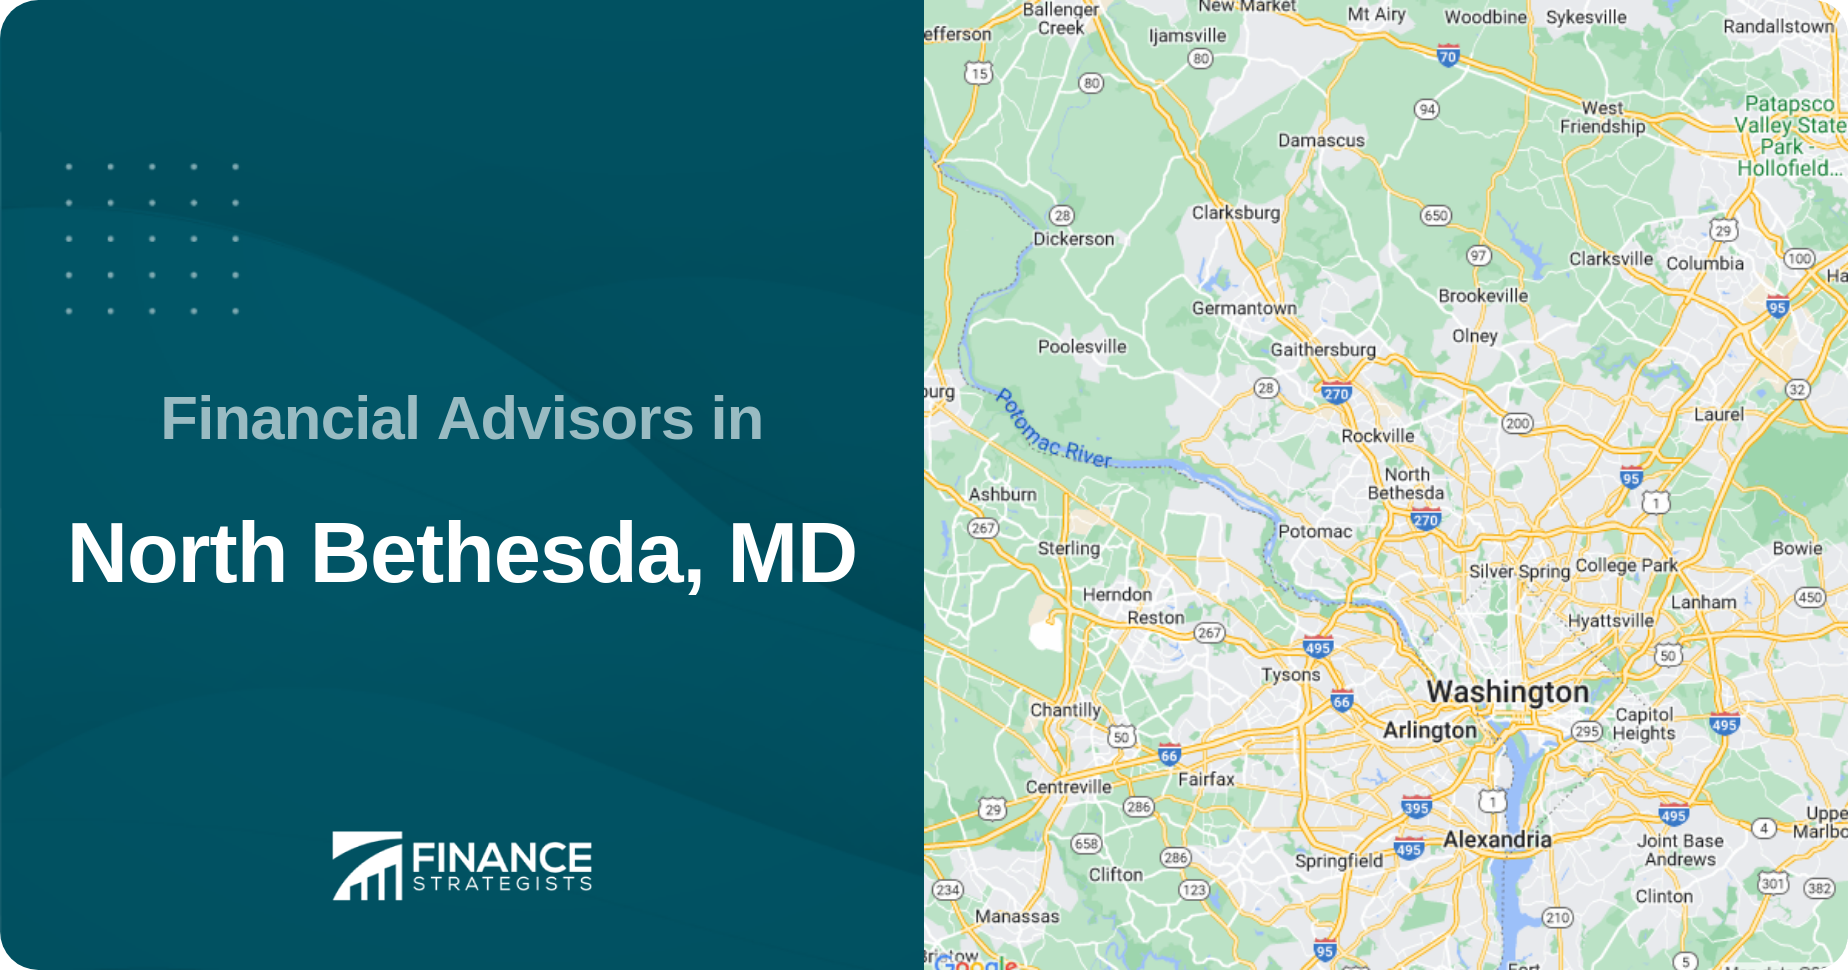 Financial Advisors in North Bethesda, MD